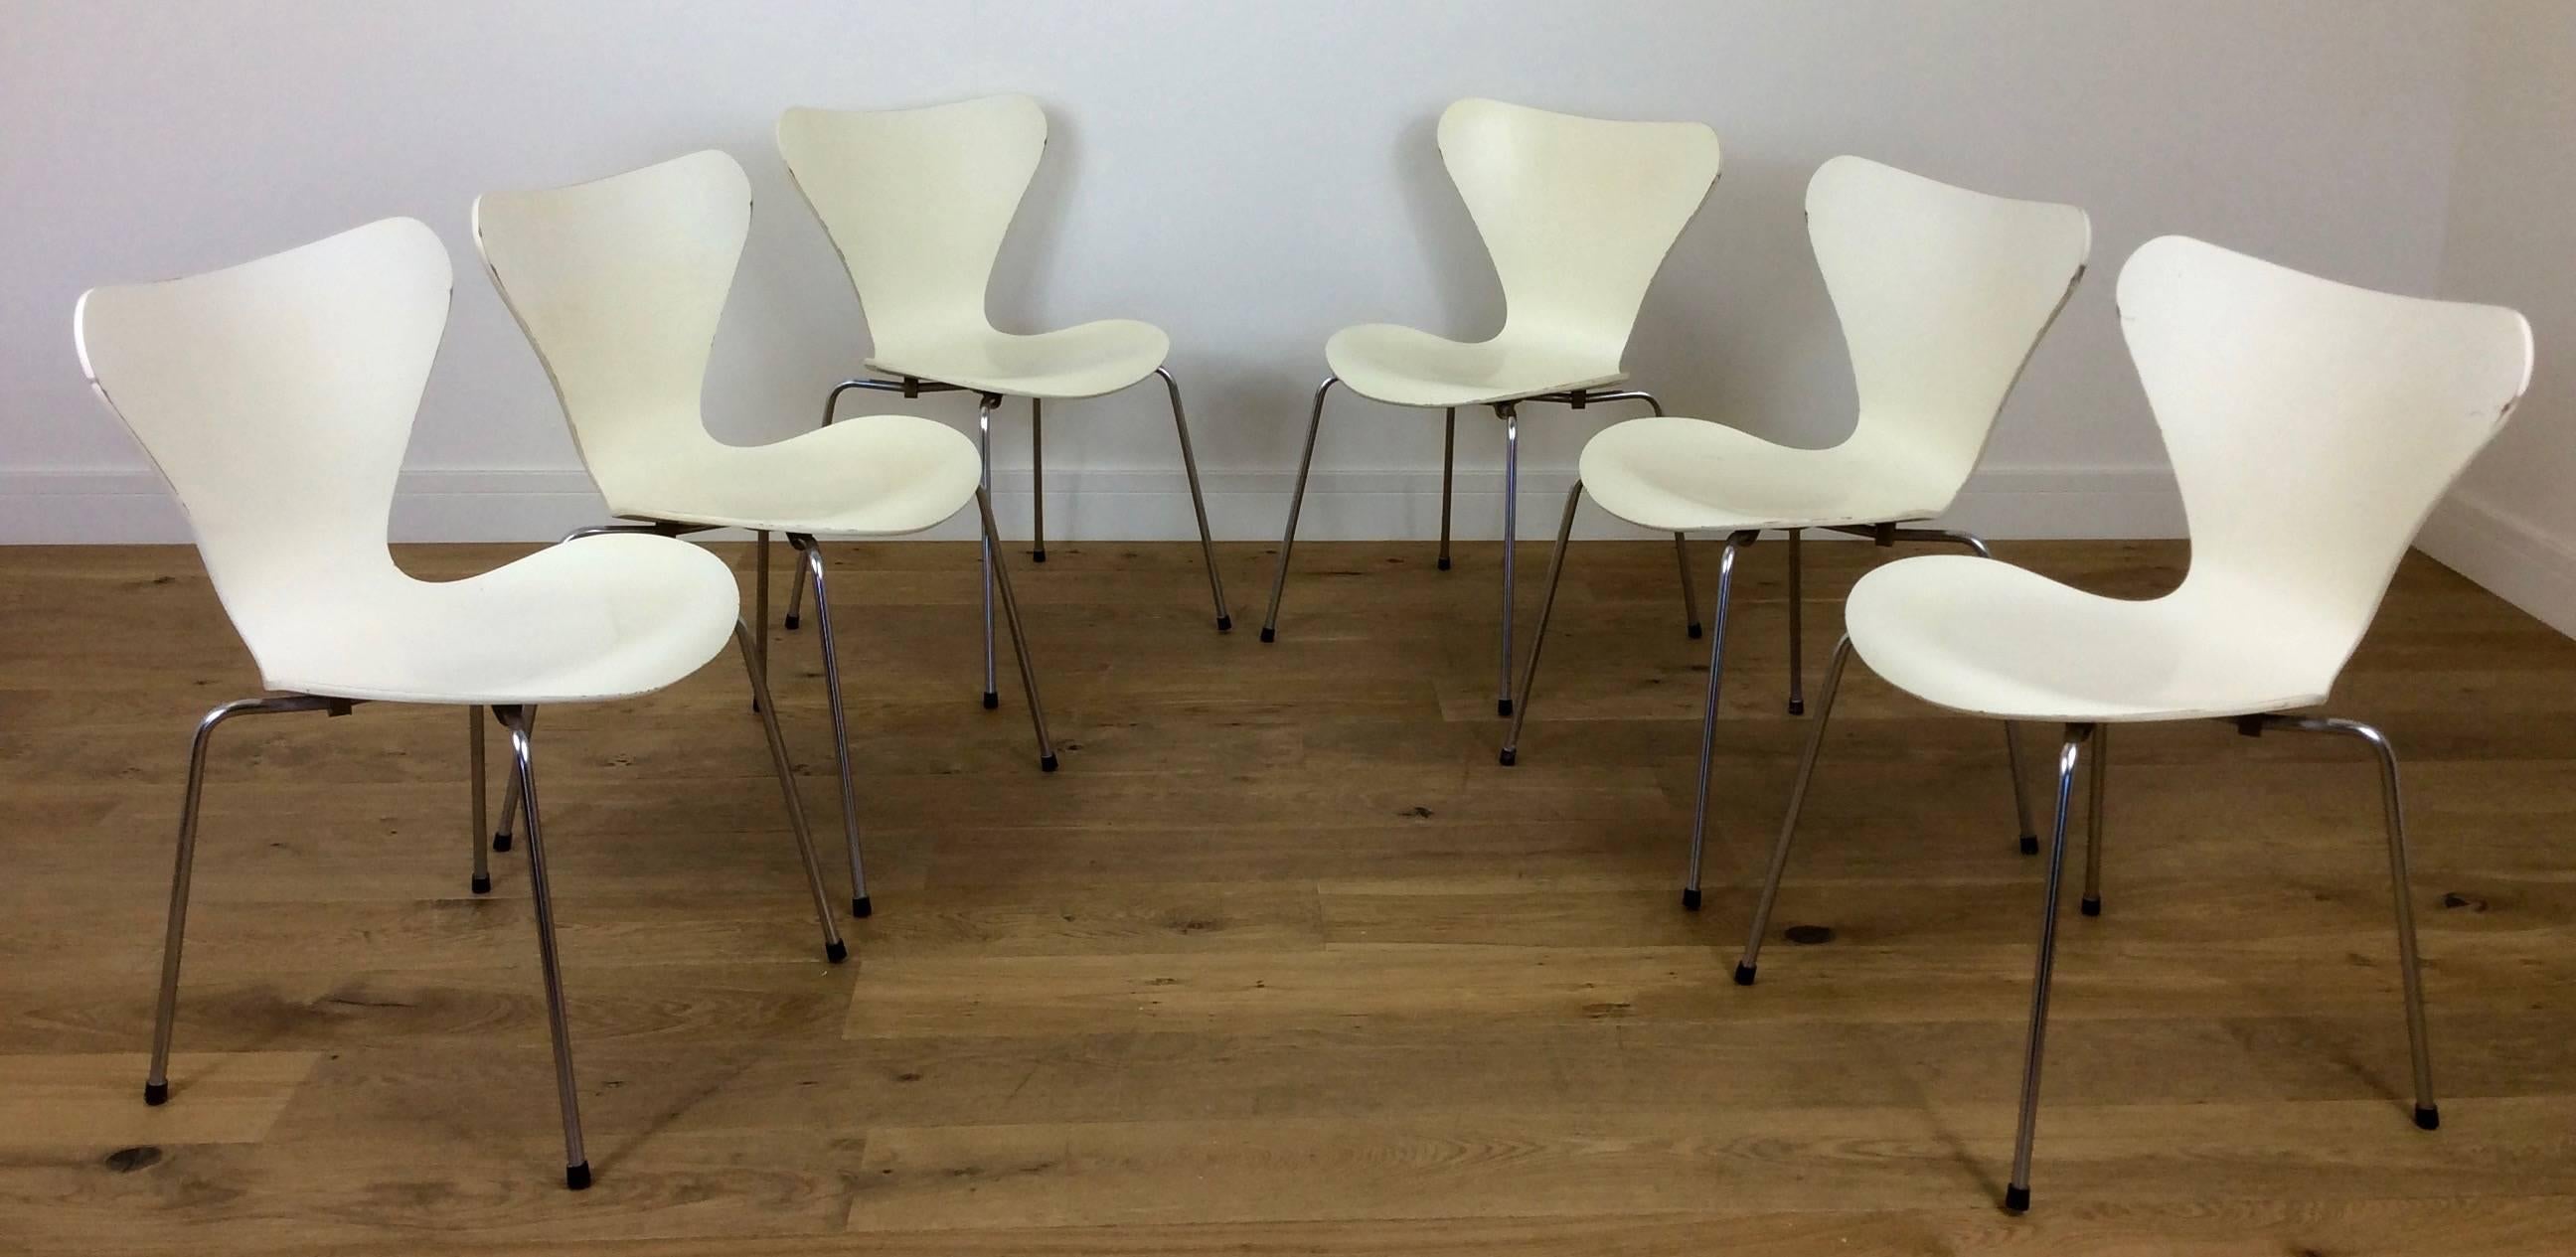 Super elliptical table designed by Piet Hein, Bruno Mathsson and Arne Jacobsen for Fritz Hansen.
The table in white laminate with aluminium edge.
Measures: 71 cm H, 180 cm W, 120 cm D.
The six chairs designed by Arne Jacobsen for Fritz